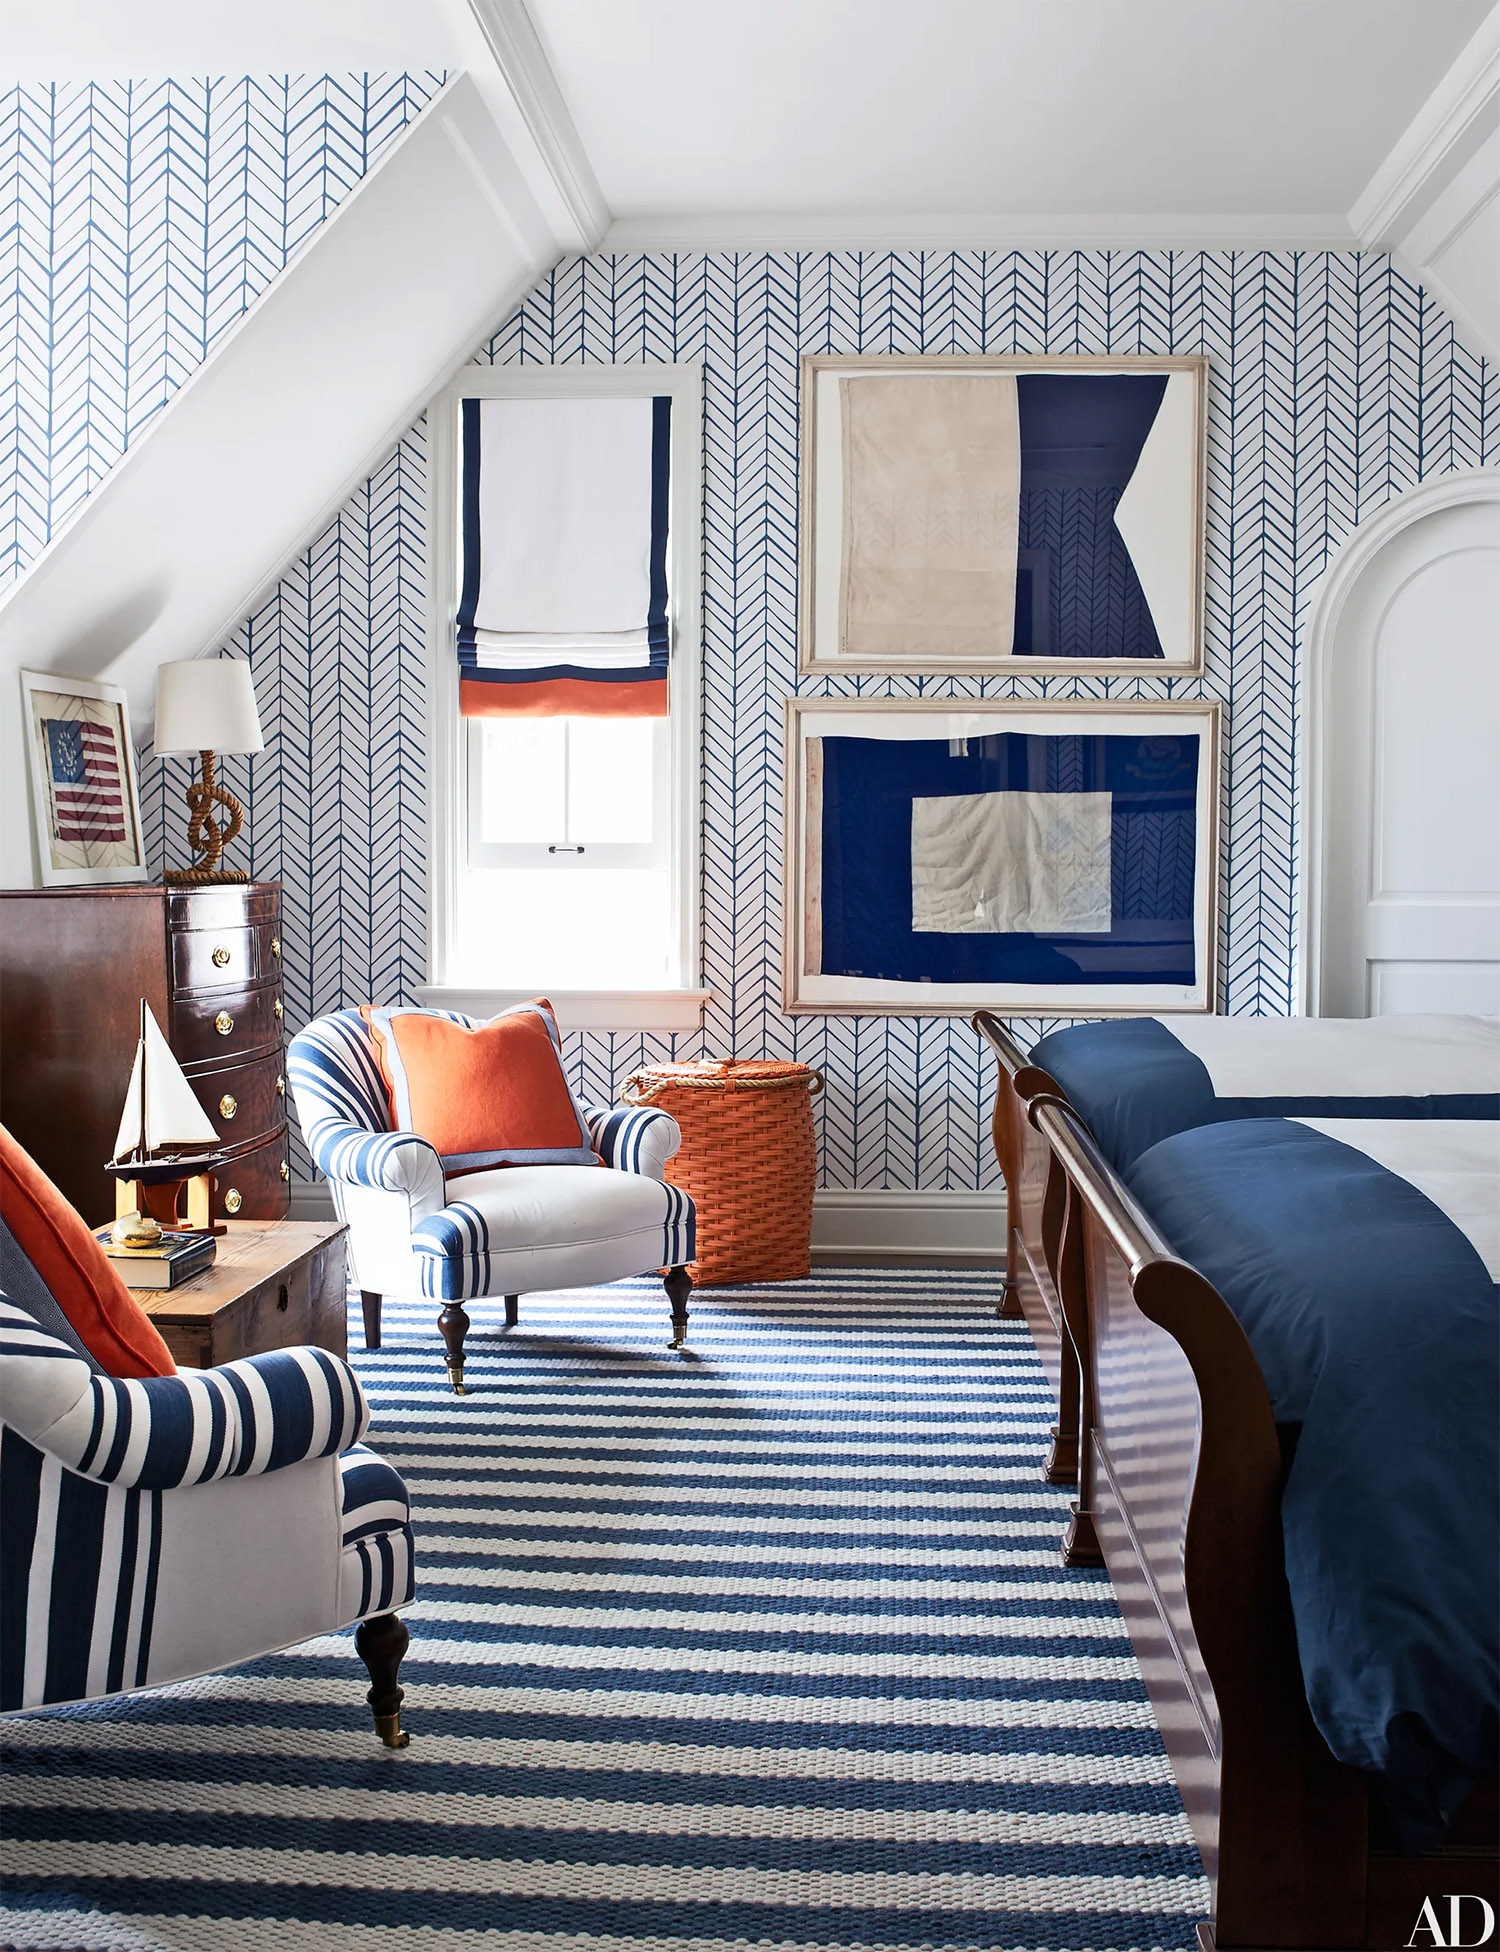 Decorating with Navy Blue